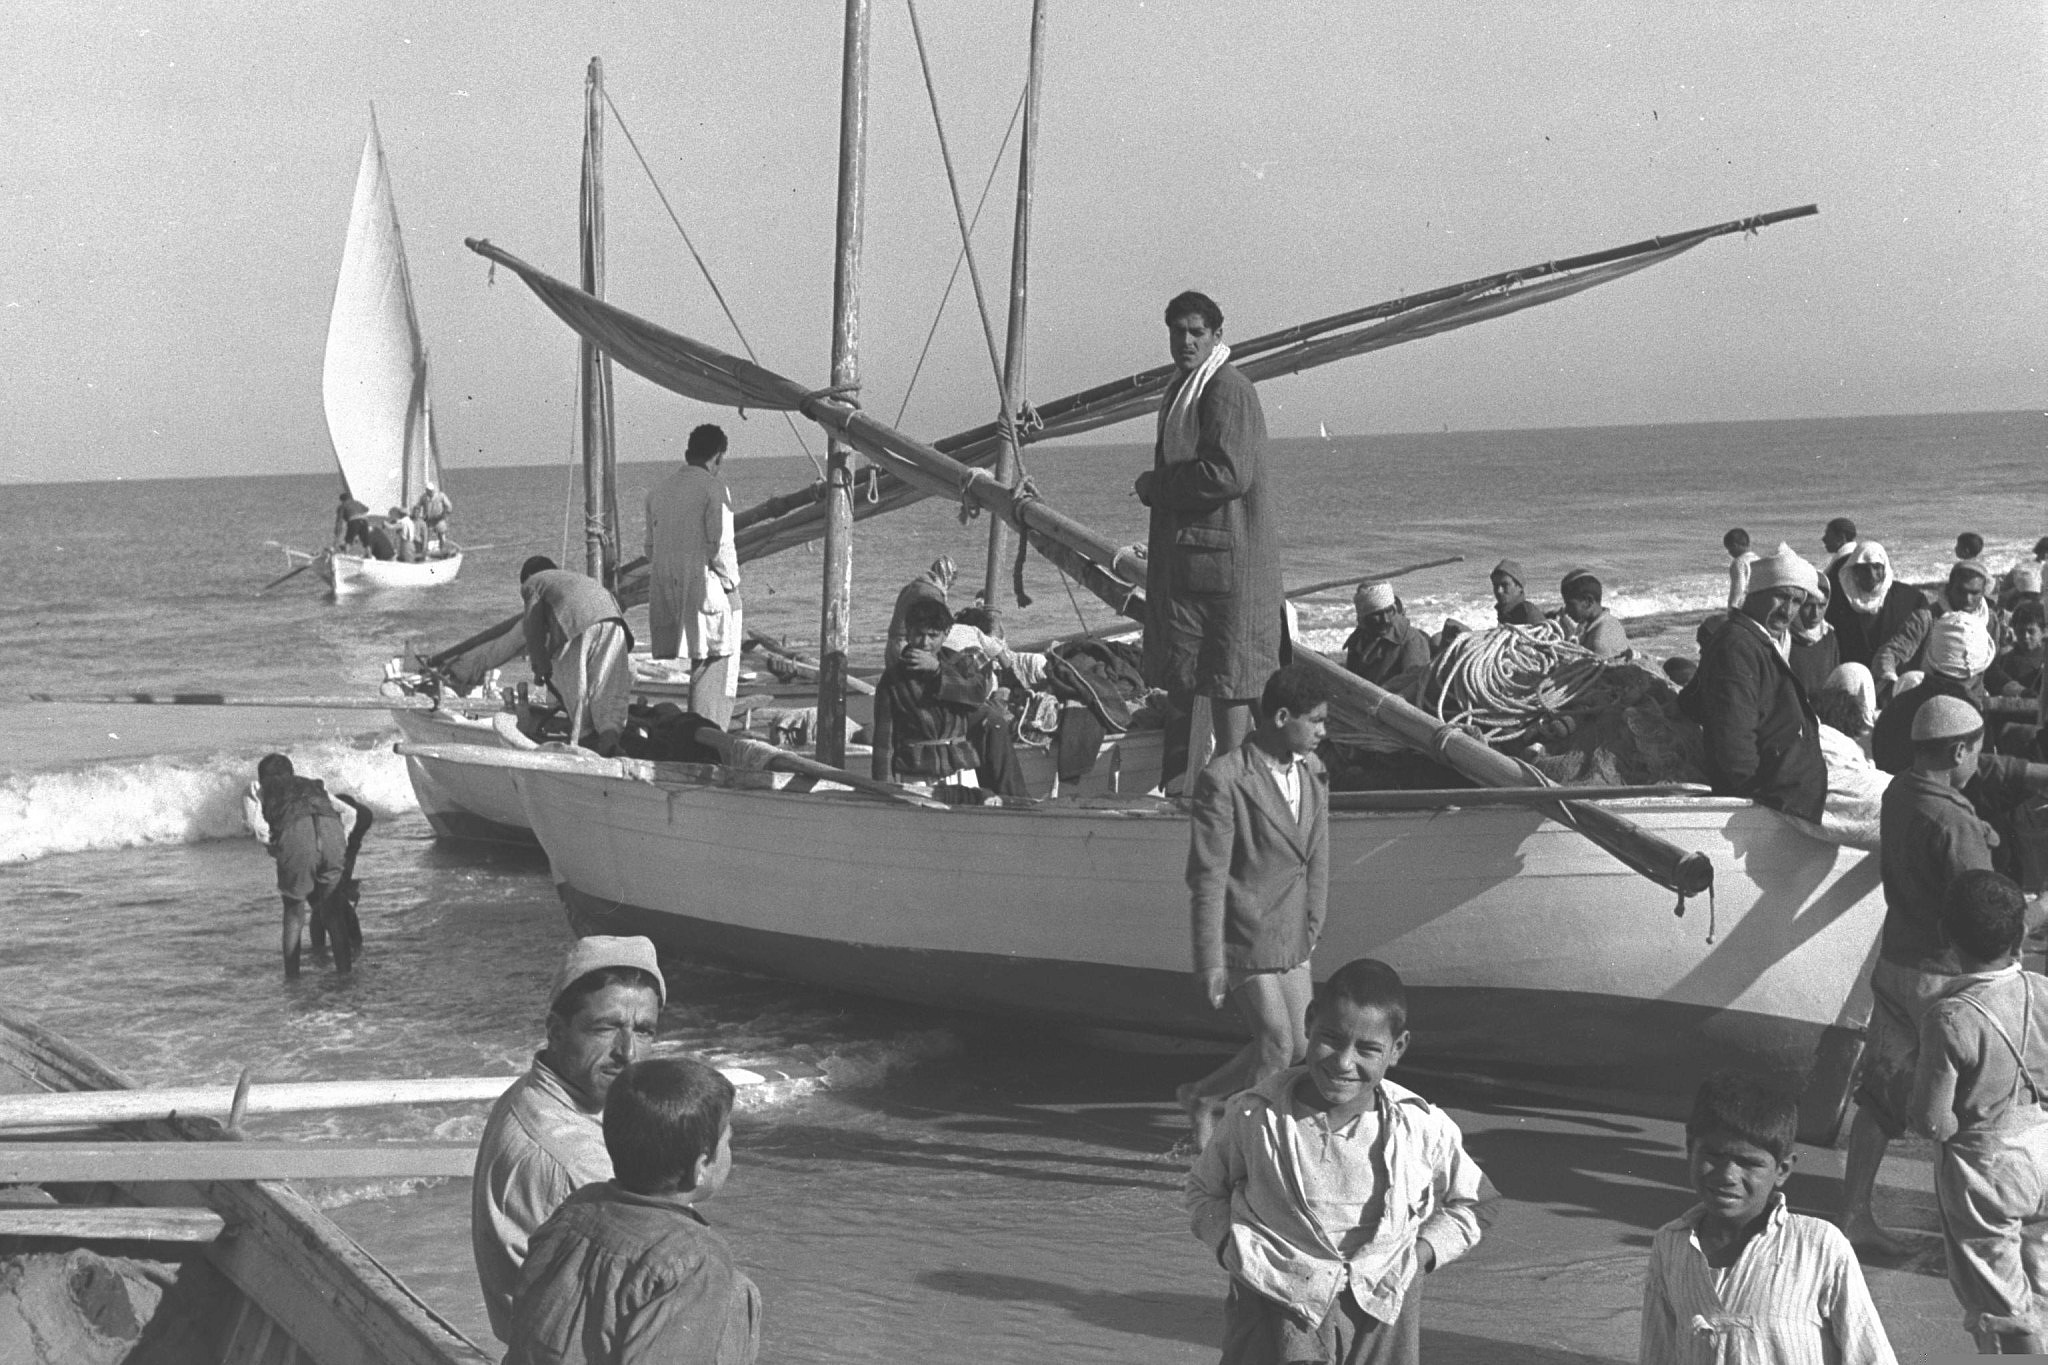 Palestinian fishermen returning from a night of fishing, on the beach in Gaza, February 10, 1957. (Fritz Cohen/GPO)